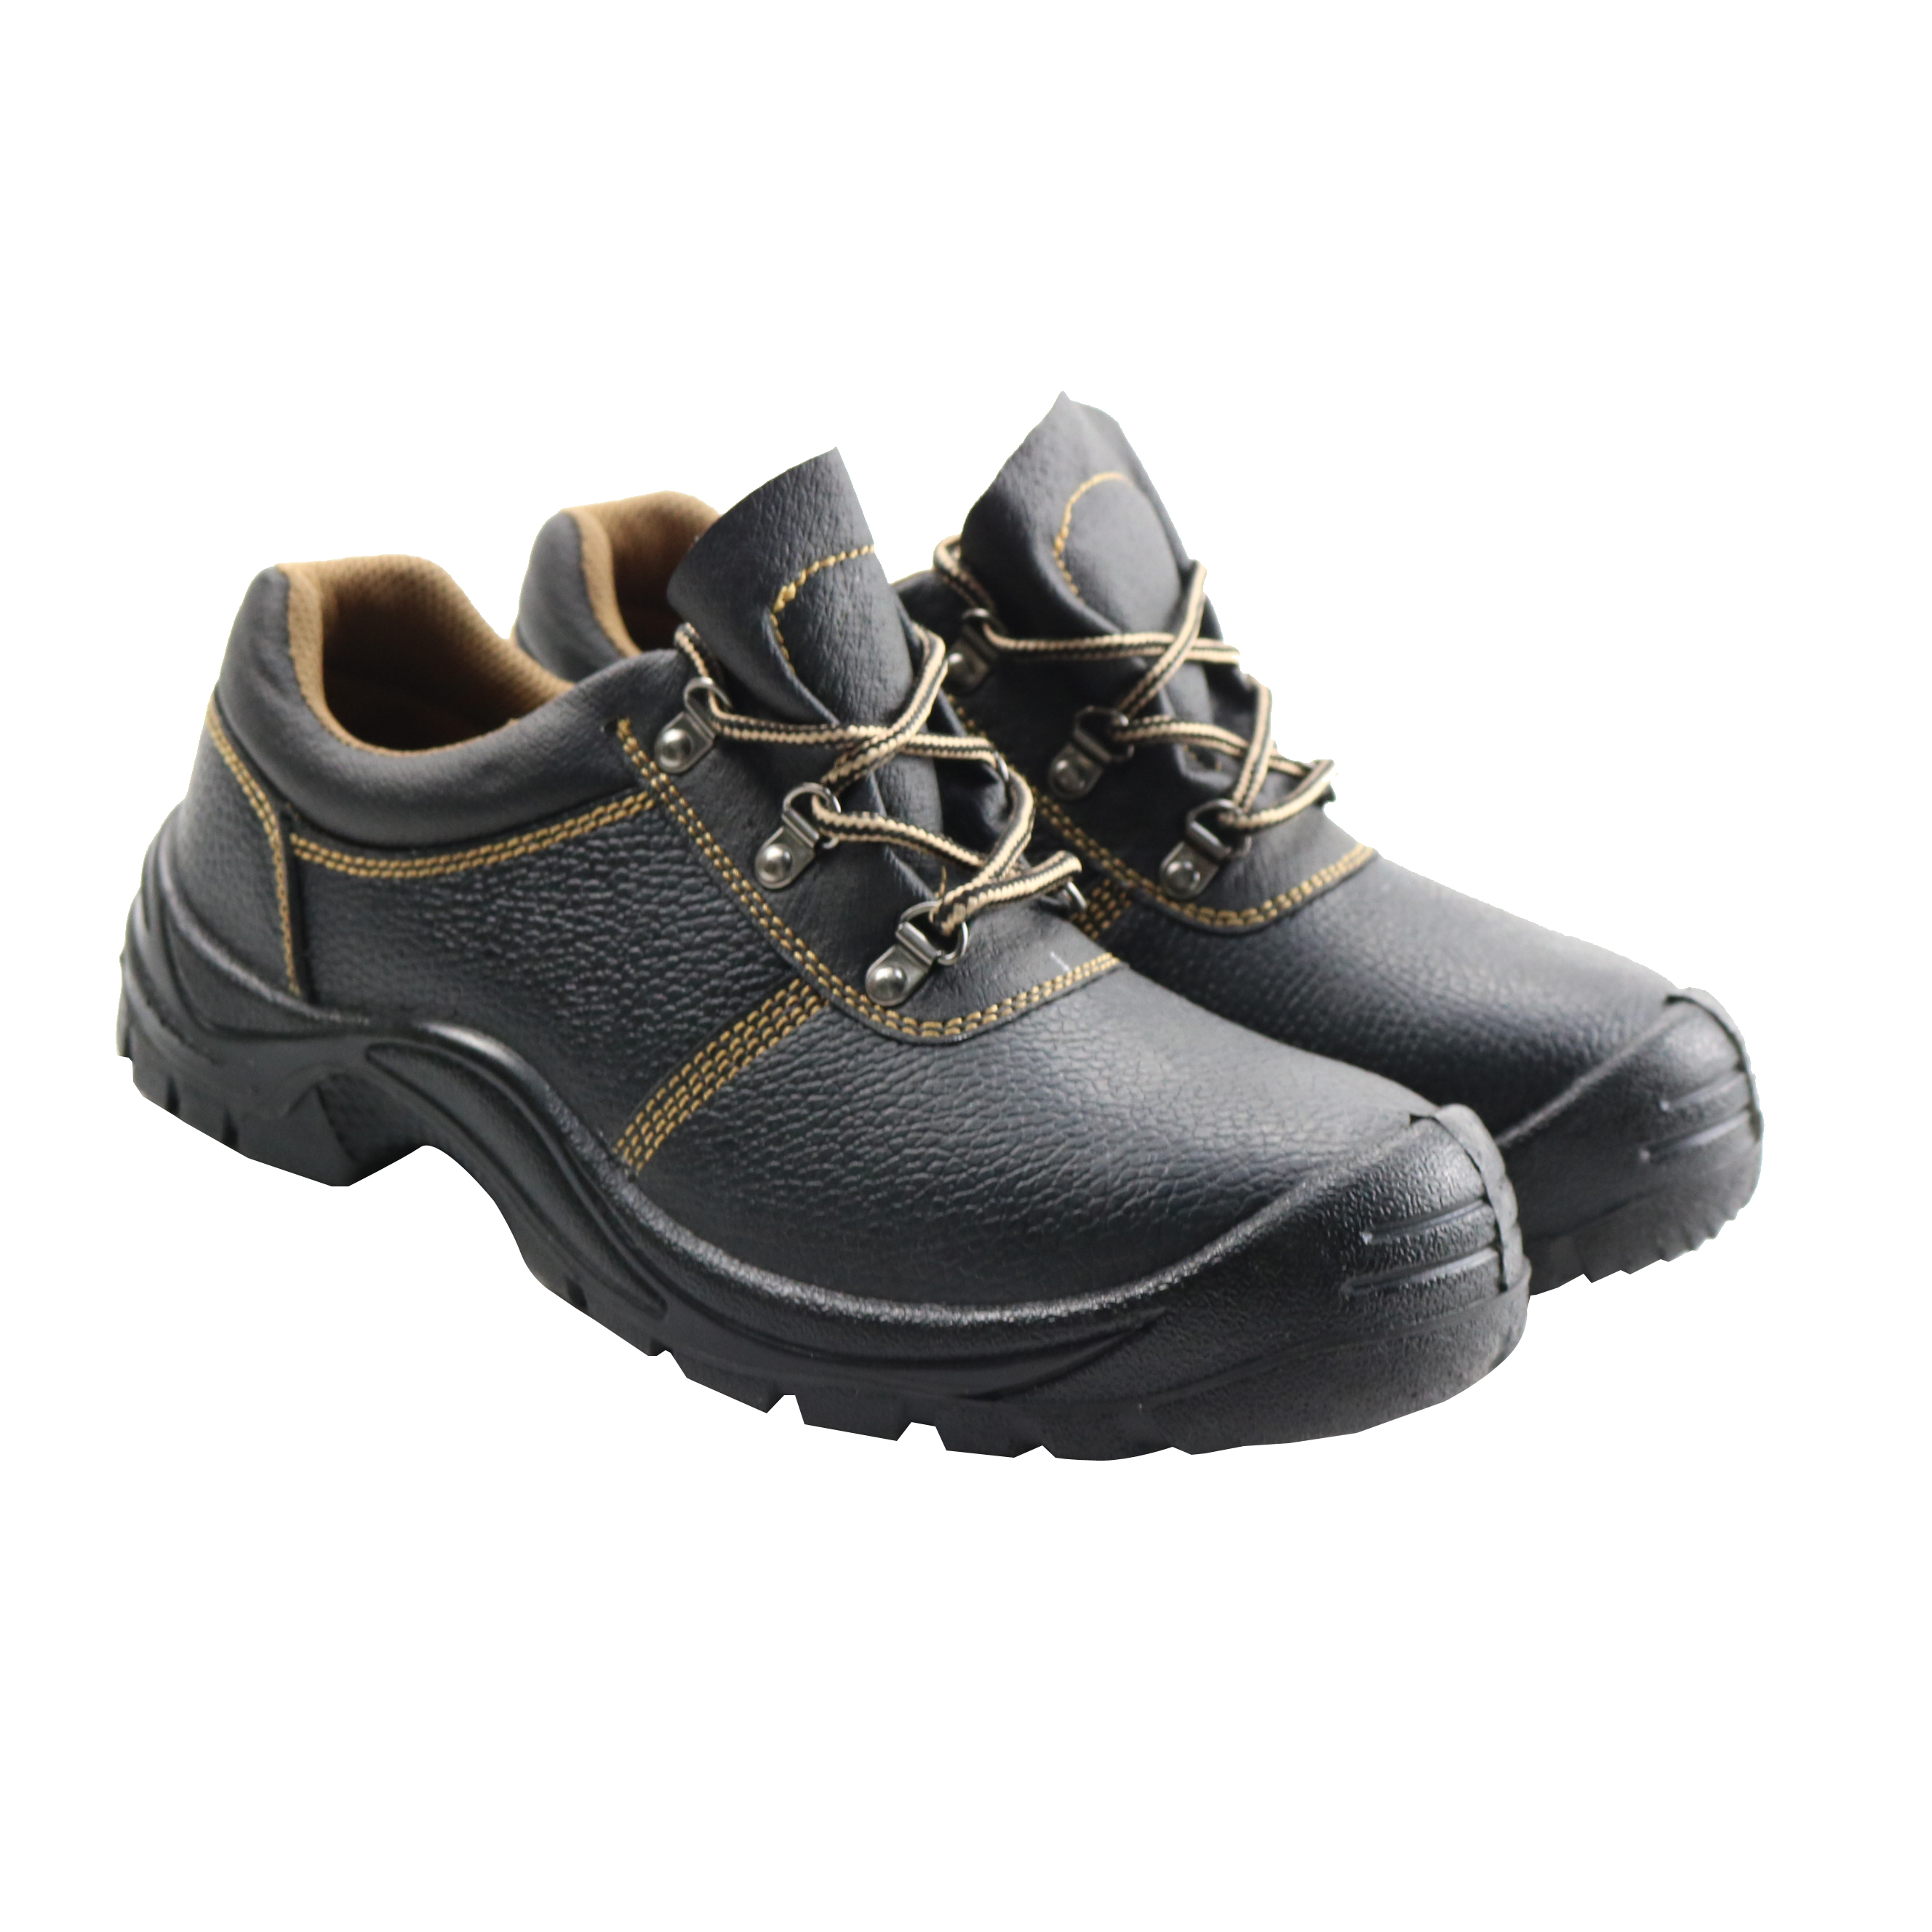 The CE  Acid Resistant &  Oil Resistant Work Industrial Safety Shoes For Men